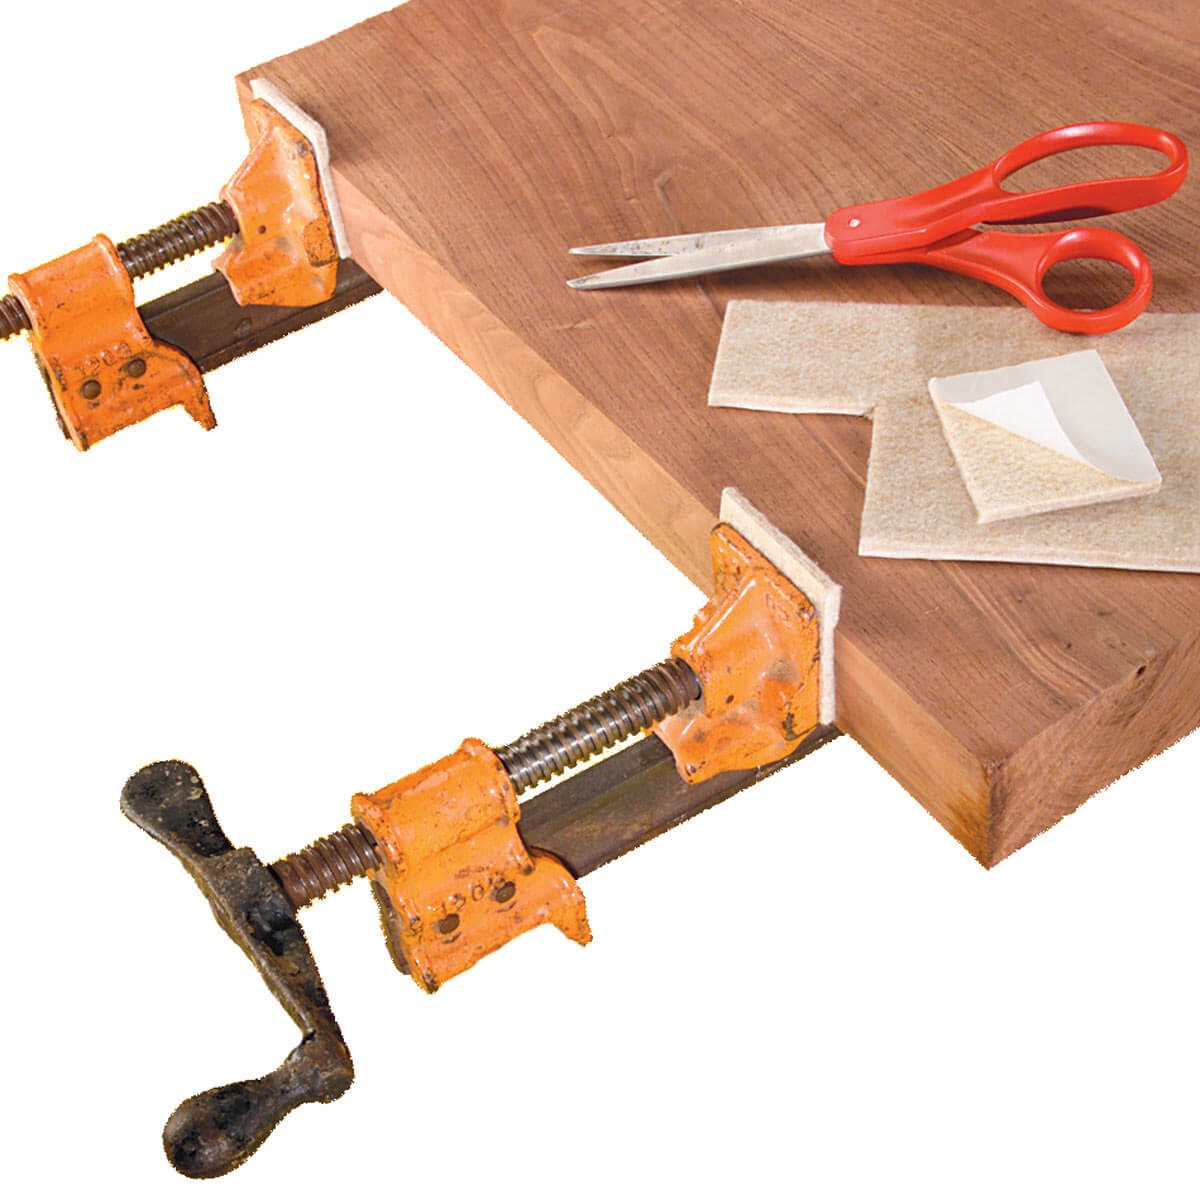 13 Ways Master Woodworkers Use Wood Clamps